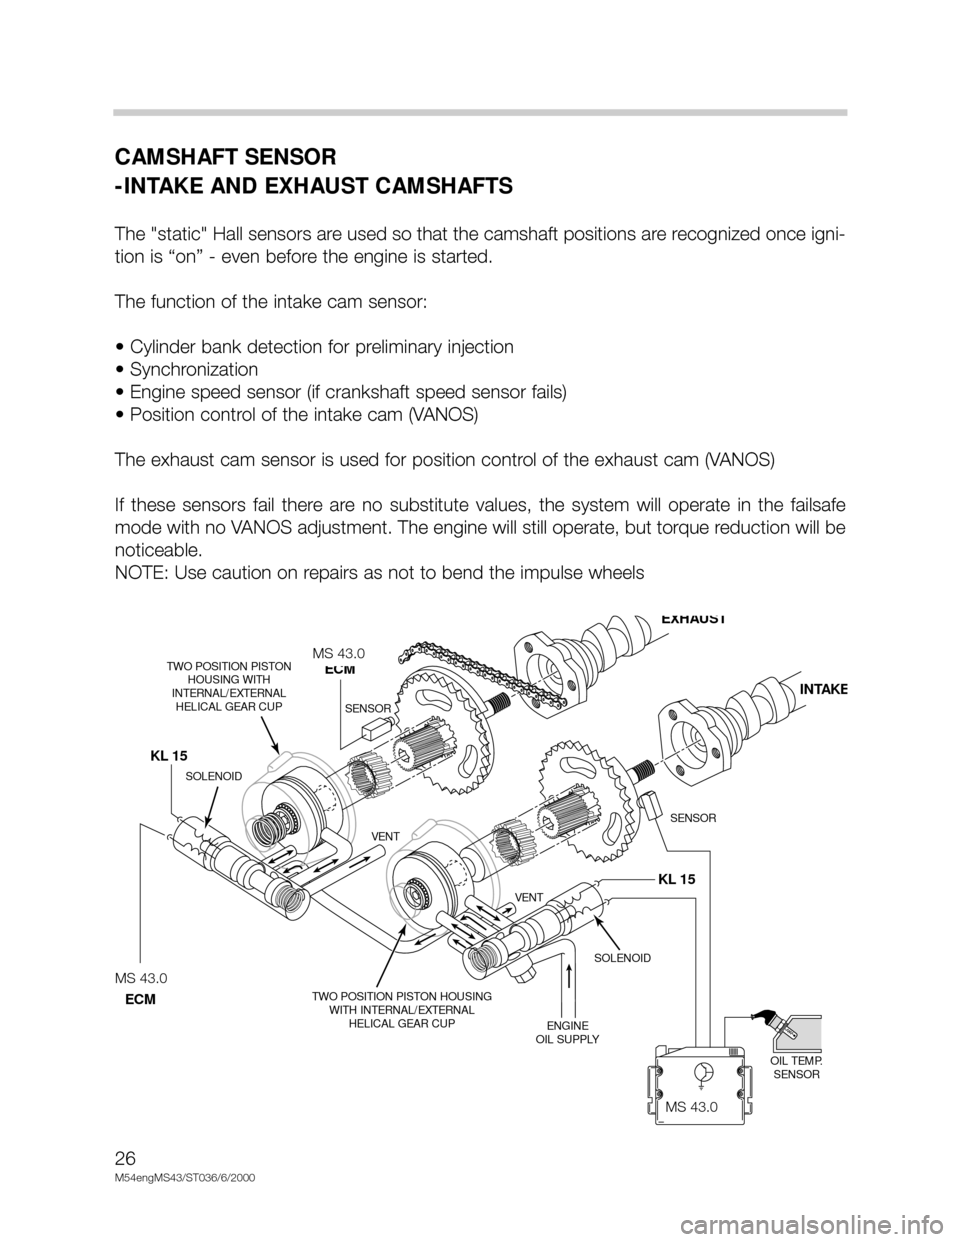 BMW X5 2004 E53 M54 Engine Workshop Manual 26
M54engMS43/ST036/6/2000
CAMSHAFT SENSOR
-INTAKE AND EXHAUST CAMSHAFTS
The "static" Hall sensors are used so that the camshaft positions are recognized once igni-
tion is “on” - even before the 